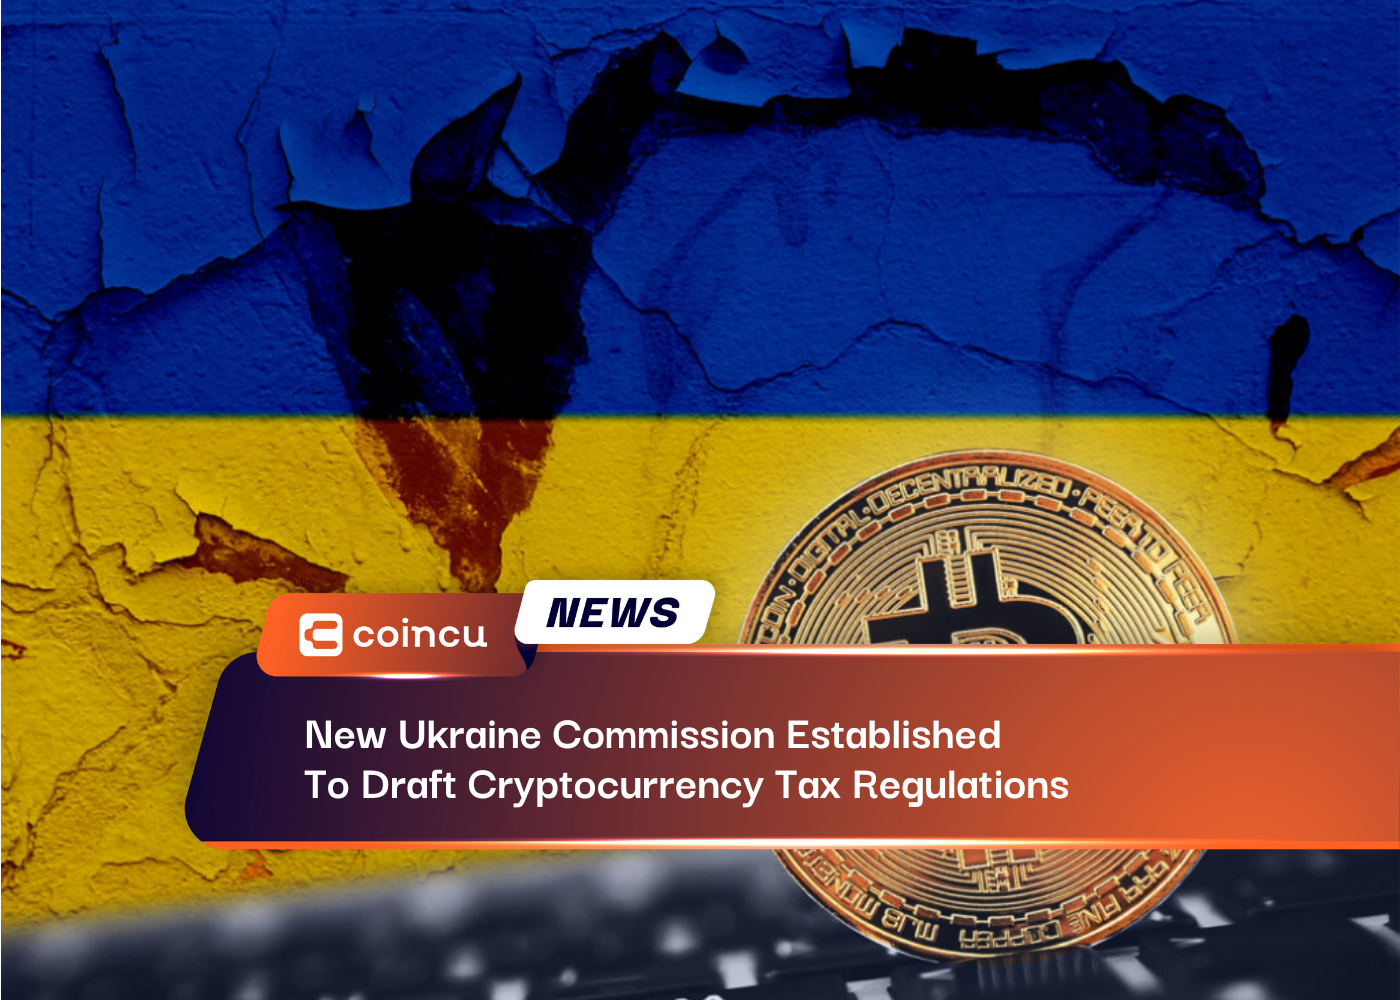 New Ukraine Commission Established To Draft Cryptocurrency Tax Regulations